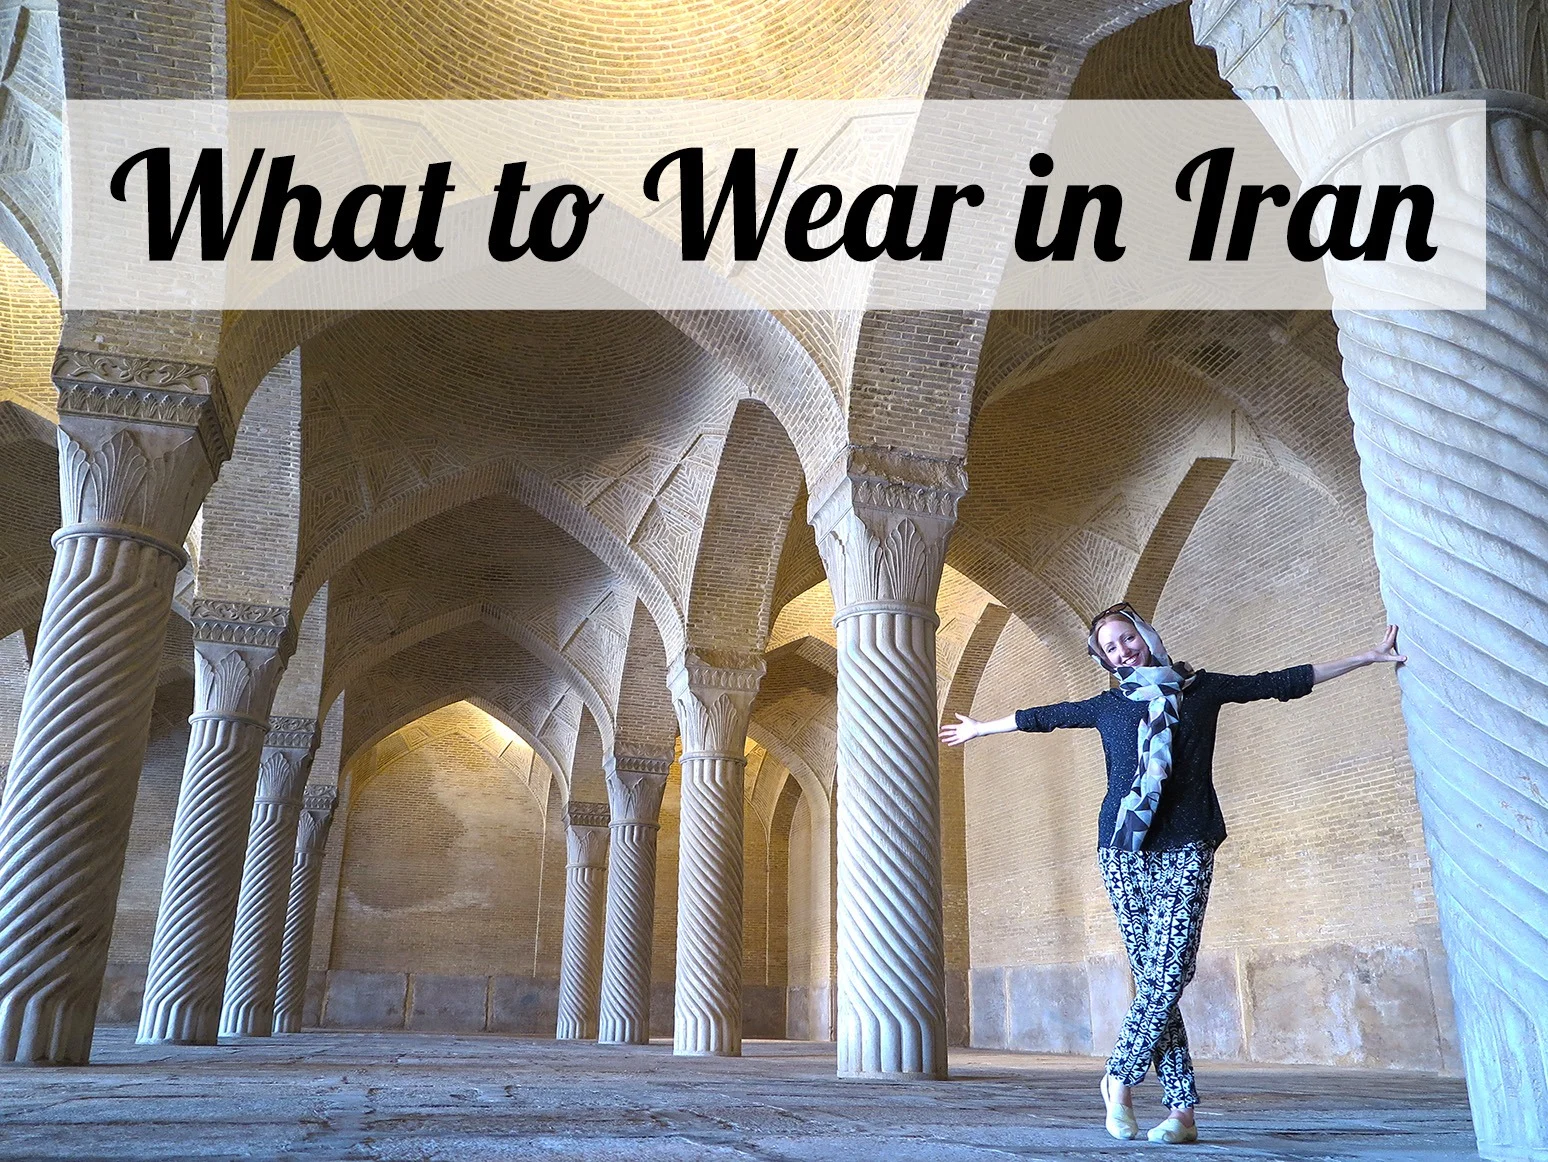 What to Wear When Travelling in Iran